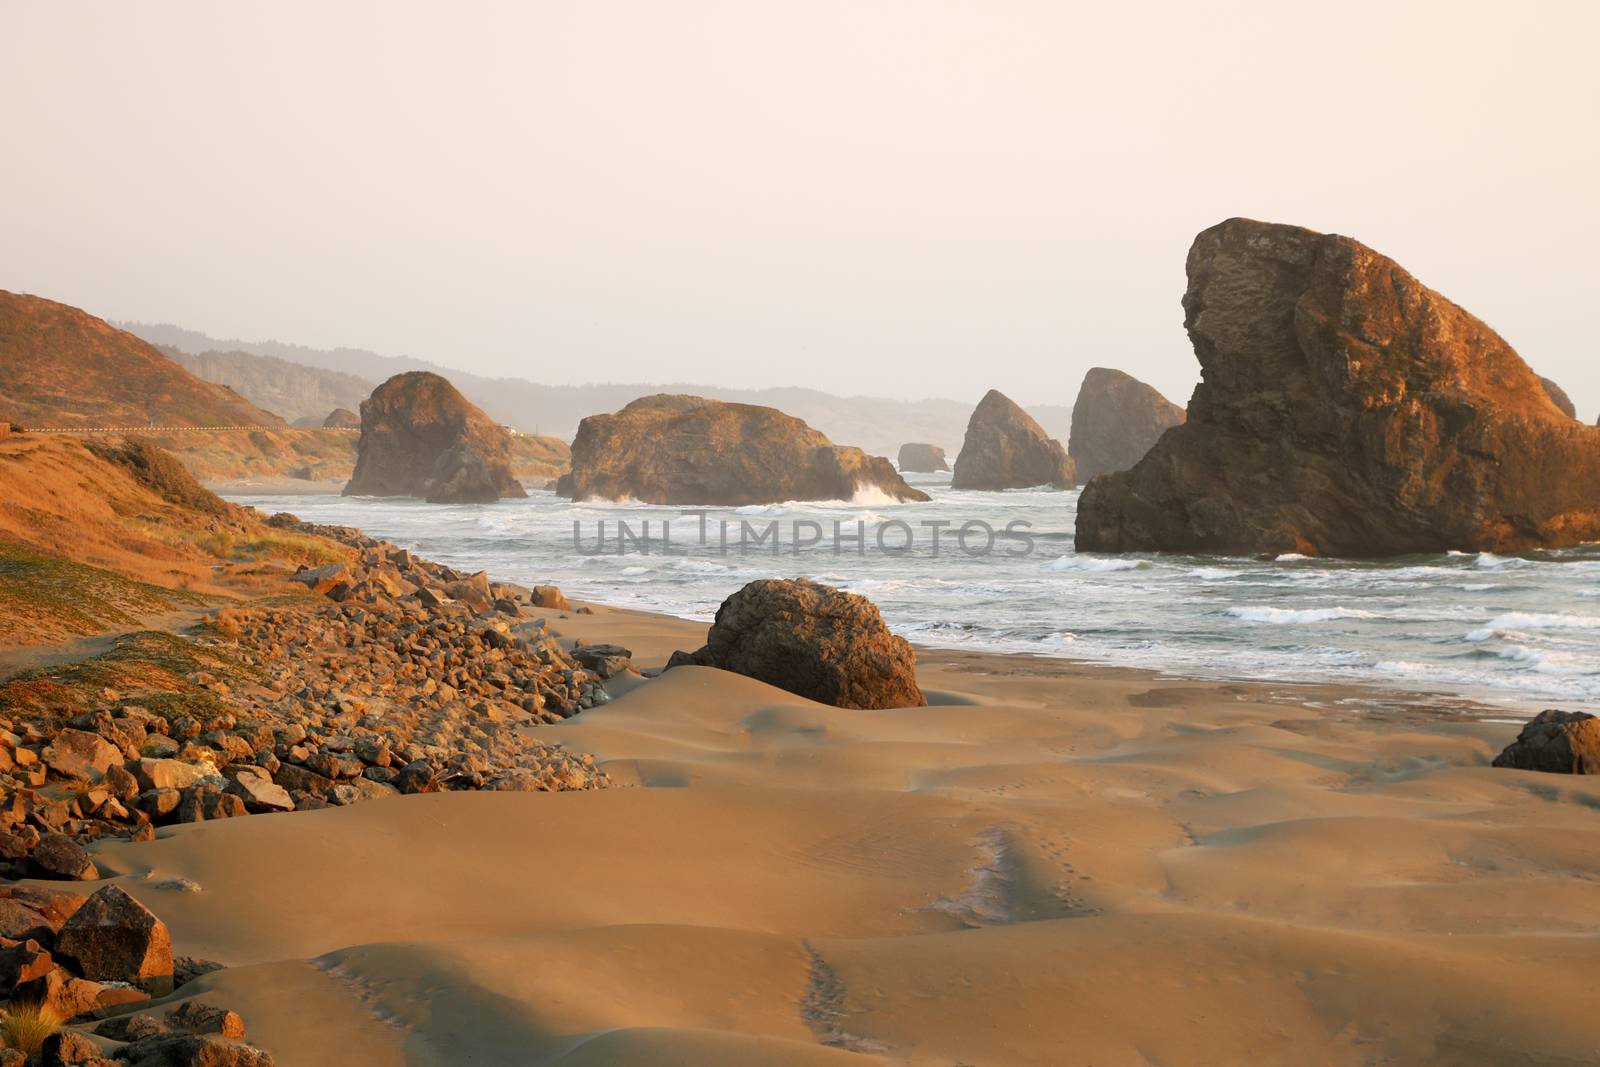 Sandy beach of the Pacific coast with rocks.